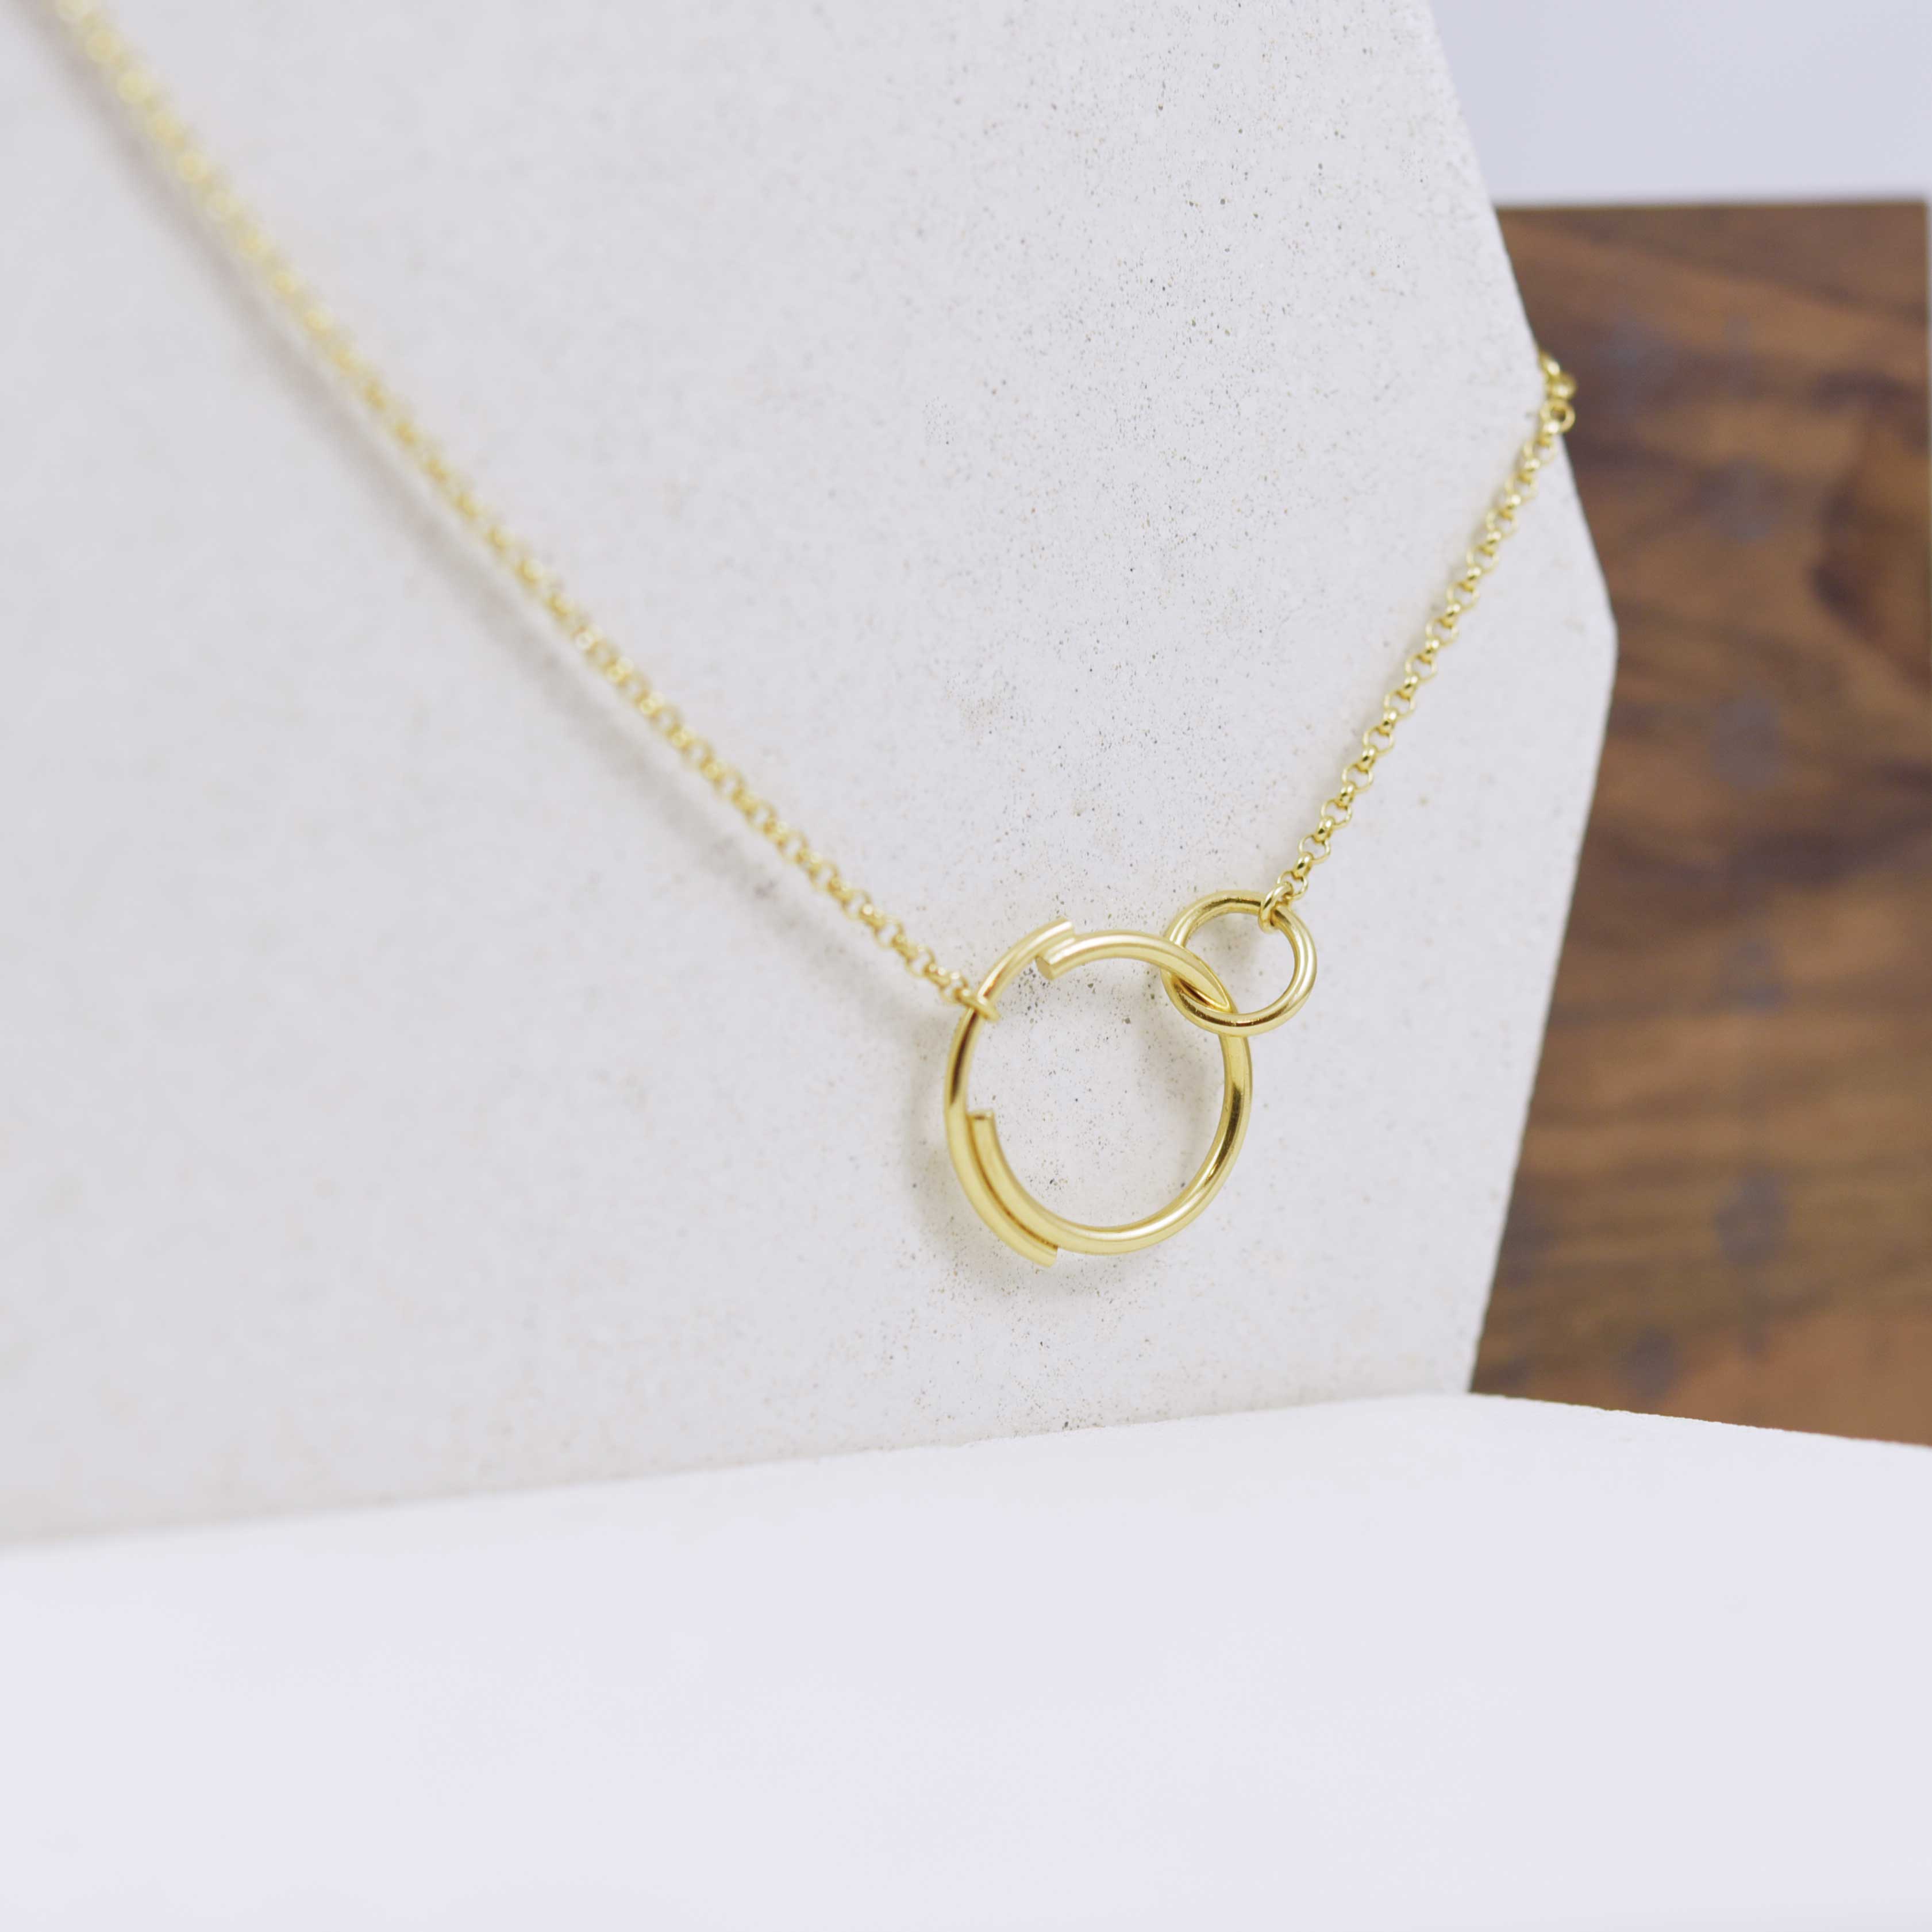 Silver Infinity Necklace, Entwined Circles Necklace, Interlocking Circles  Chain, Interlocking Circles Necklace, Minimal Silver Necklace - Etsy